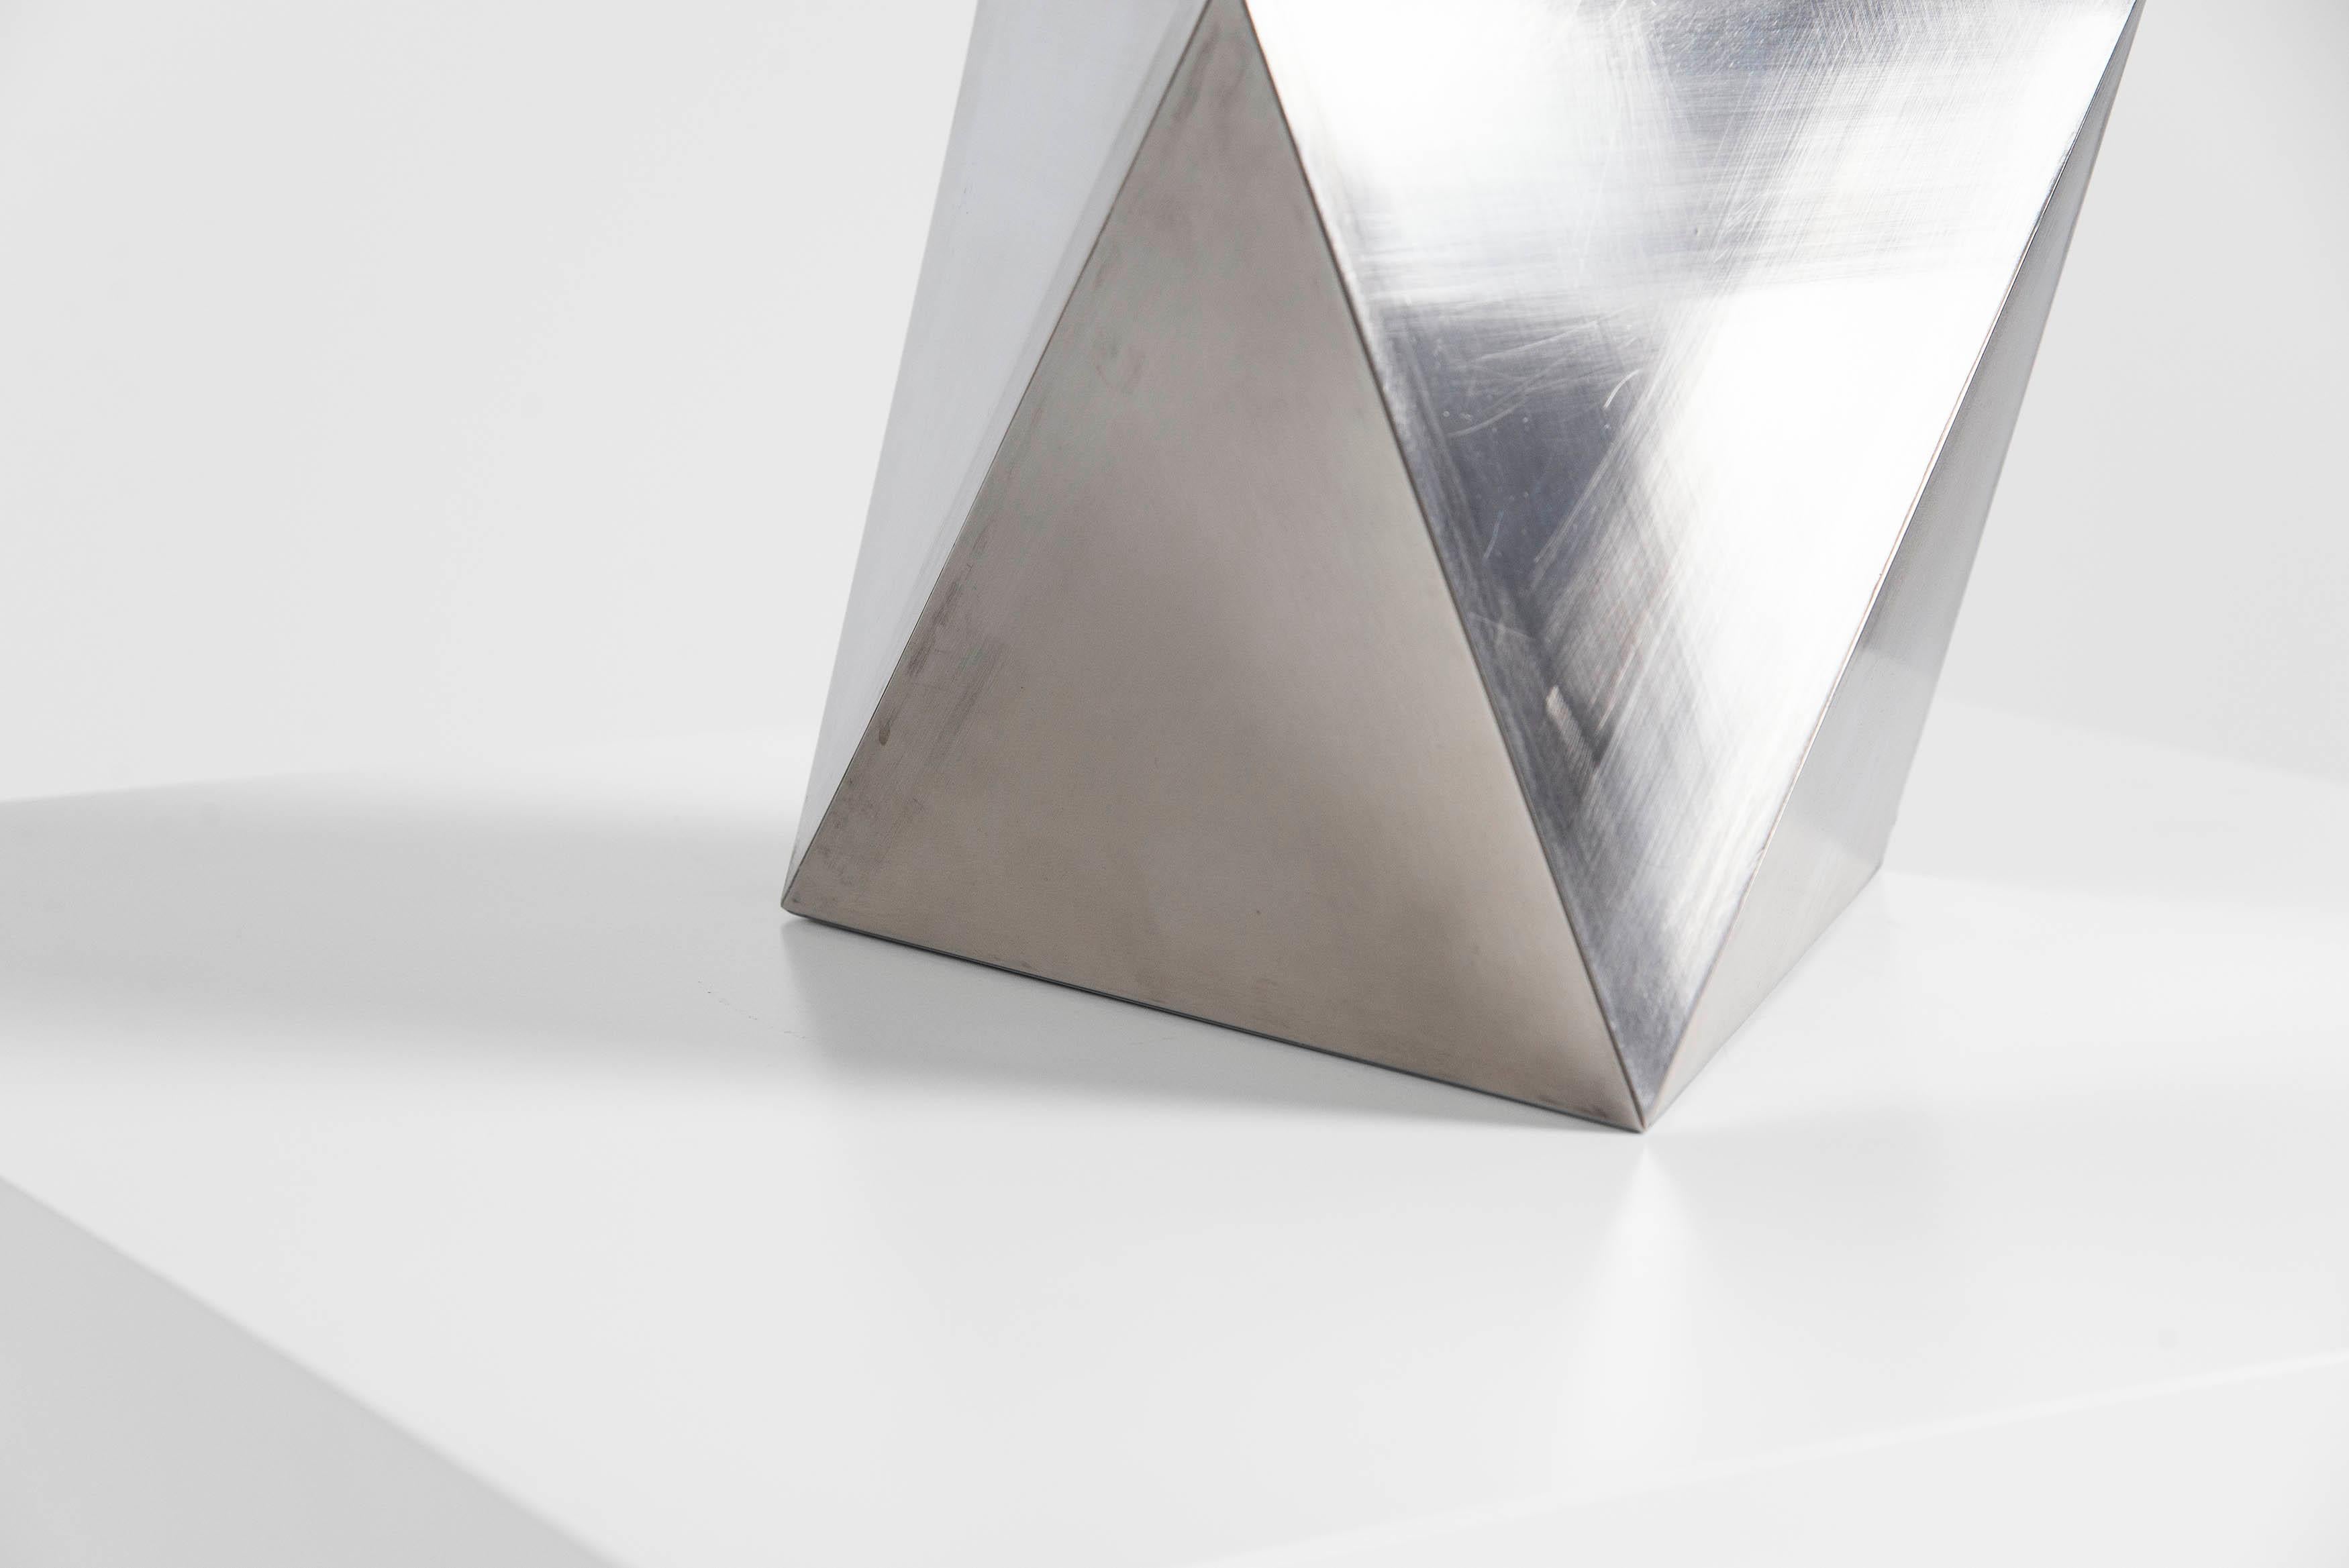 Rudolf Wolf Geometric Stainless Steel Sculpture 1981 In Good Condition For Sale In Roosendaal, Noord Brabant